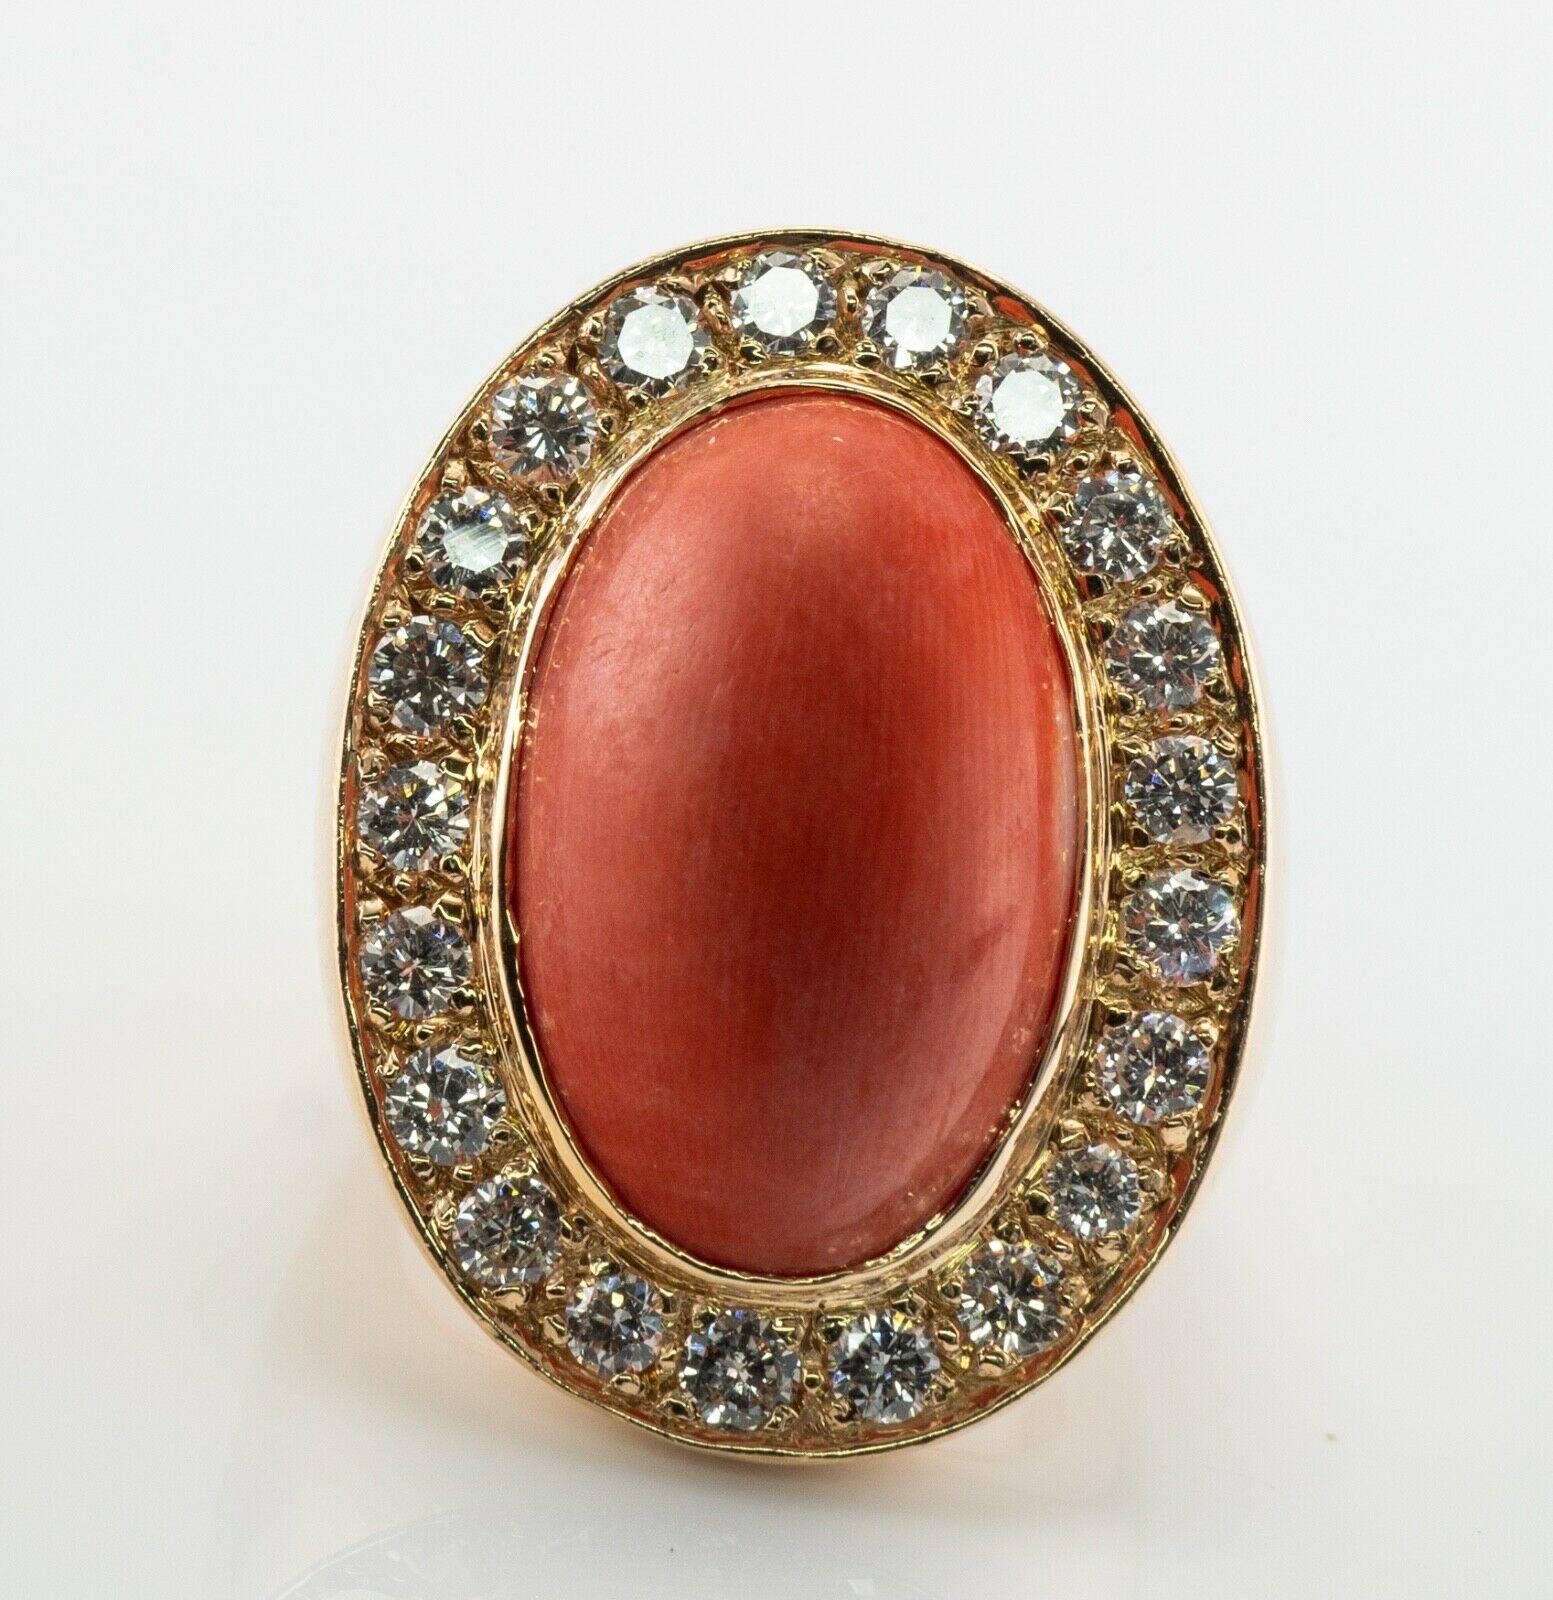 Diamond Coral Ring 14K Gold Band Cocktail Zivko

This stunning show case vintage ring is finely crafted in solid 14K Yellow Gold, hallmarked with ZIVKO inside of the shank, and set with genuine Coral in the center and diamonds. The gem measures 19mm